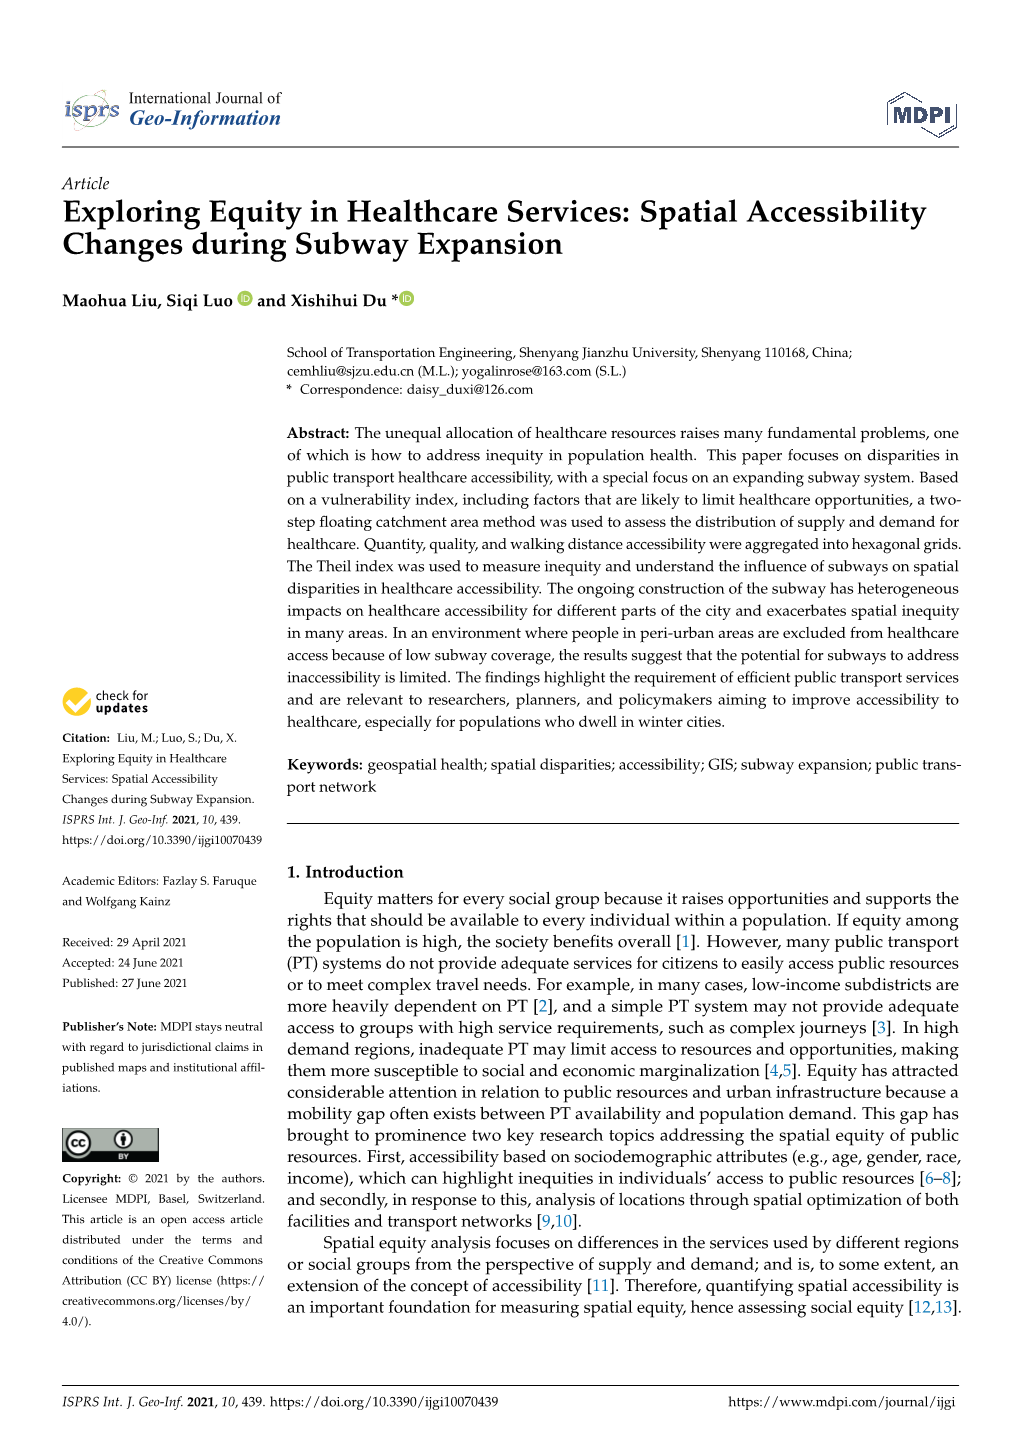 Exploring Equity in Healthcare Services: Spatial Accessibility Changes During Subway Expansion